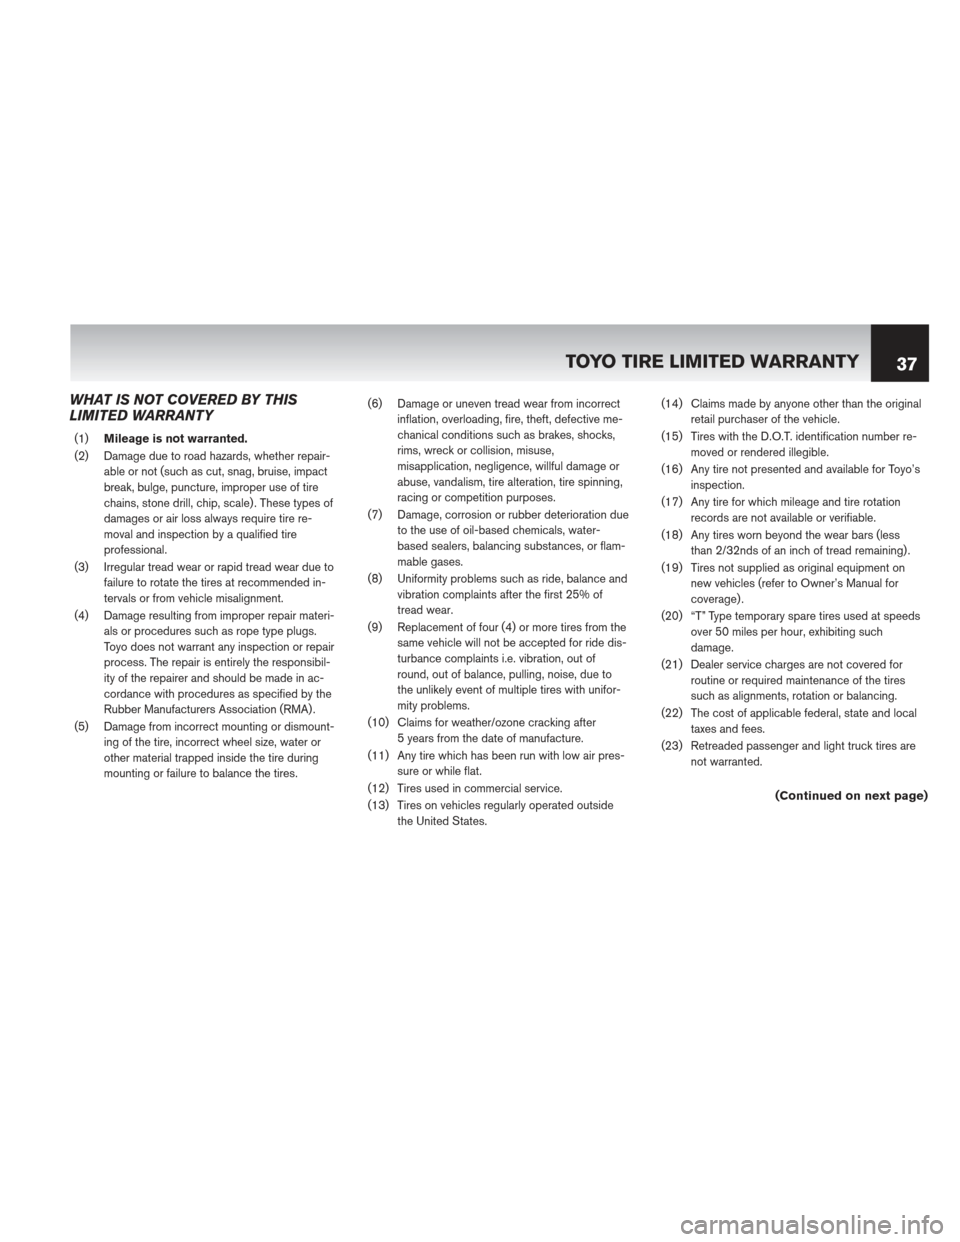 NISSAN TITAN 2013 1.G Warranty Booklet WHAT IS NOT COVERED BY THIS
LIMITED WARRANTY
(1)Mileage is not warranted.
(2) Damage due to road hazards, whether repair- able or not (such as cut, snag, bruise, impact
break, bulge, puncture, imprope